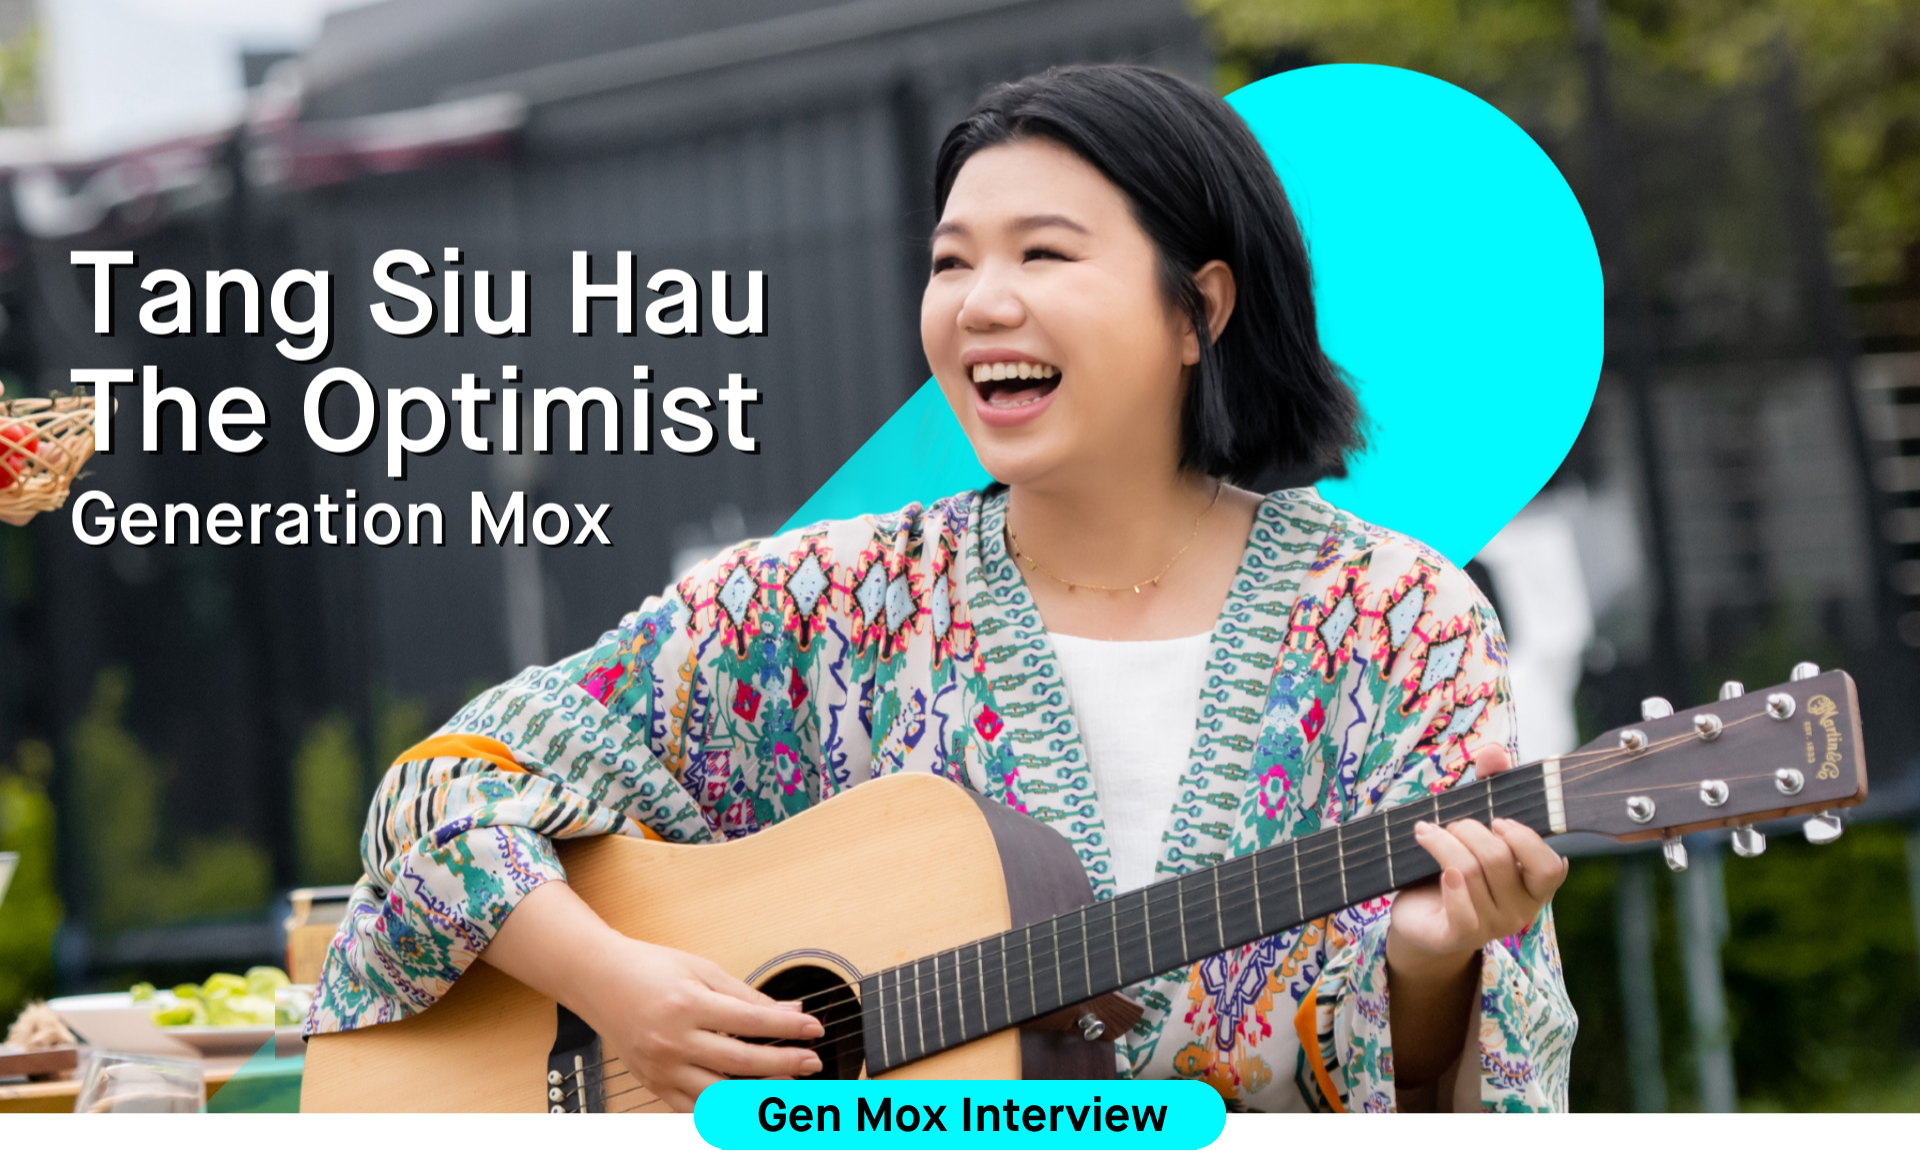 Gen Mox Interview with Tang Siu Hau: The Optimist